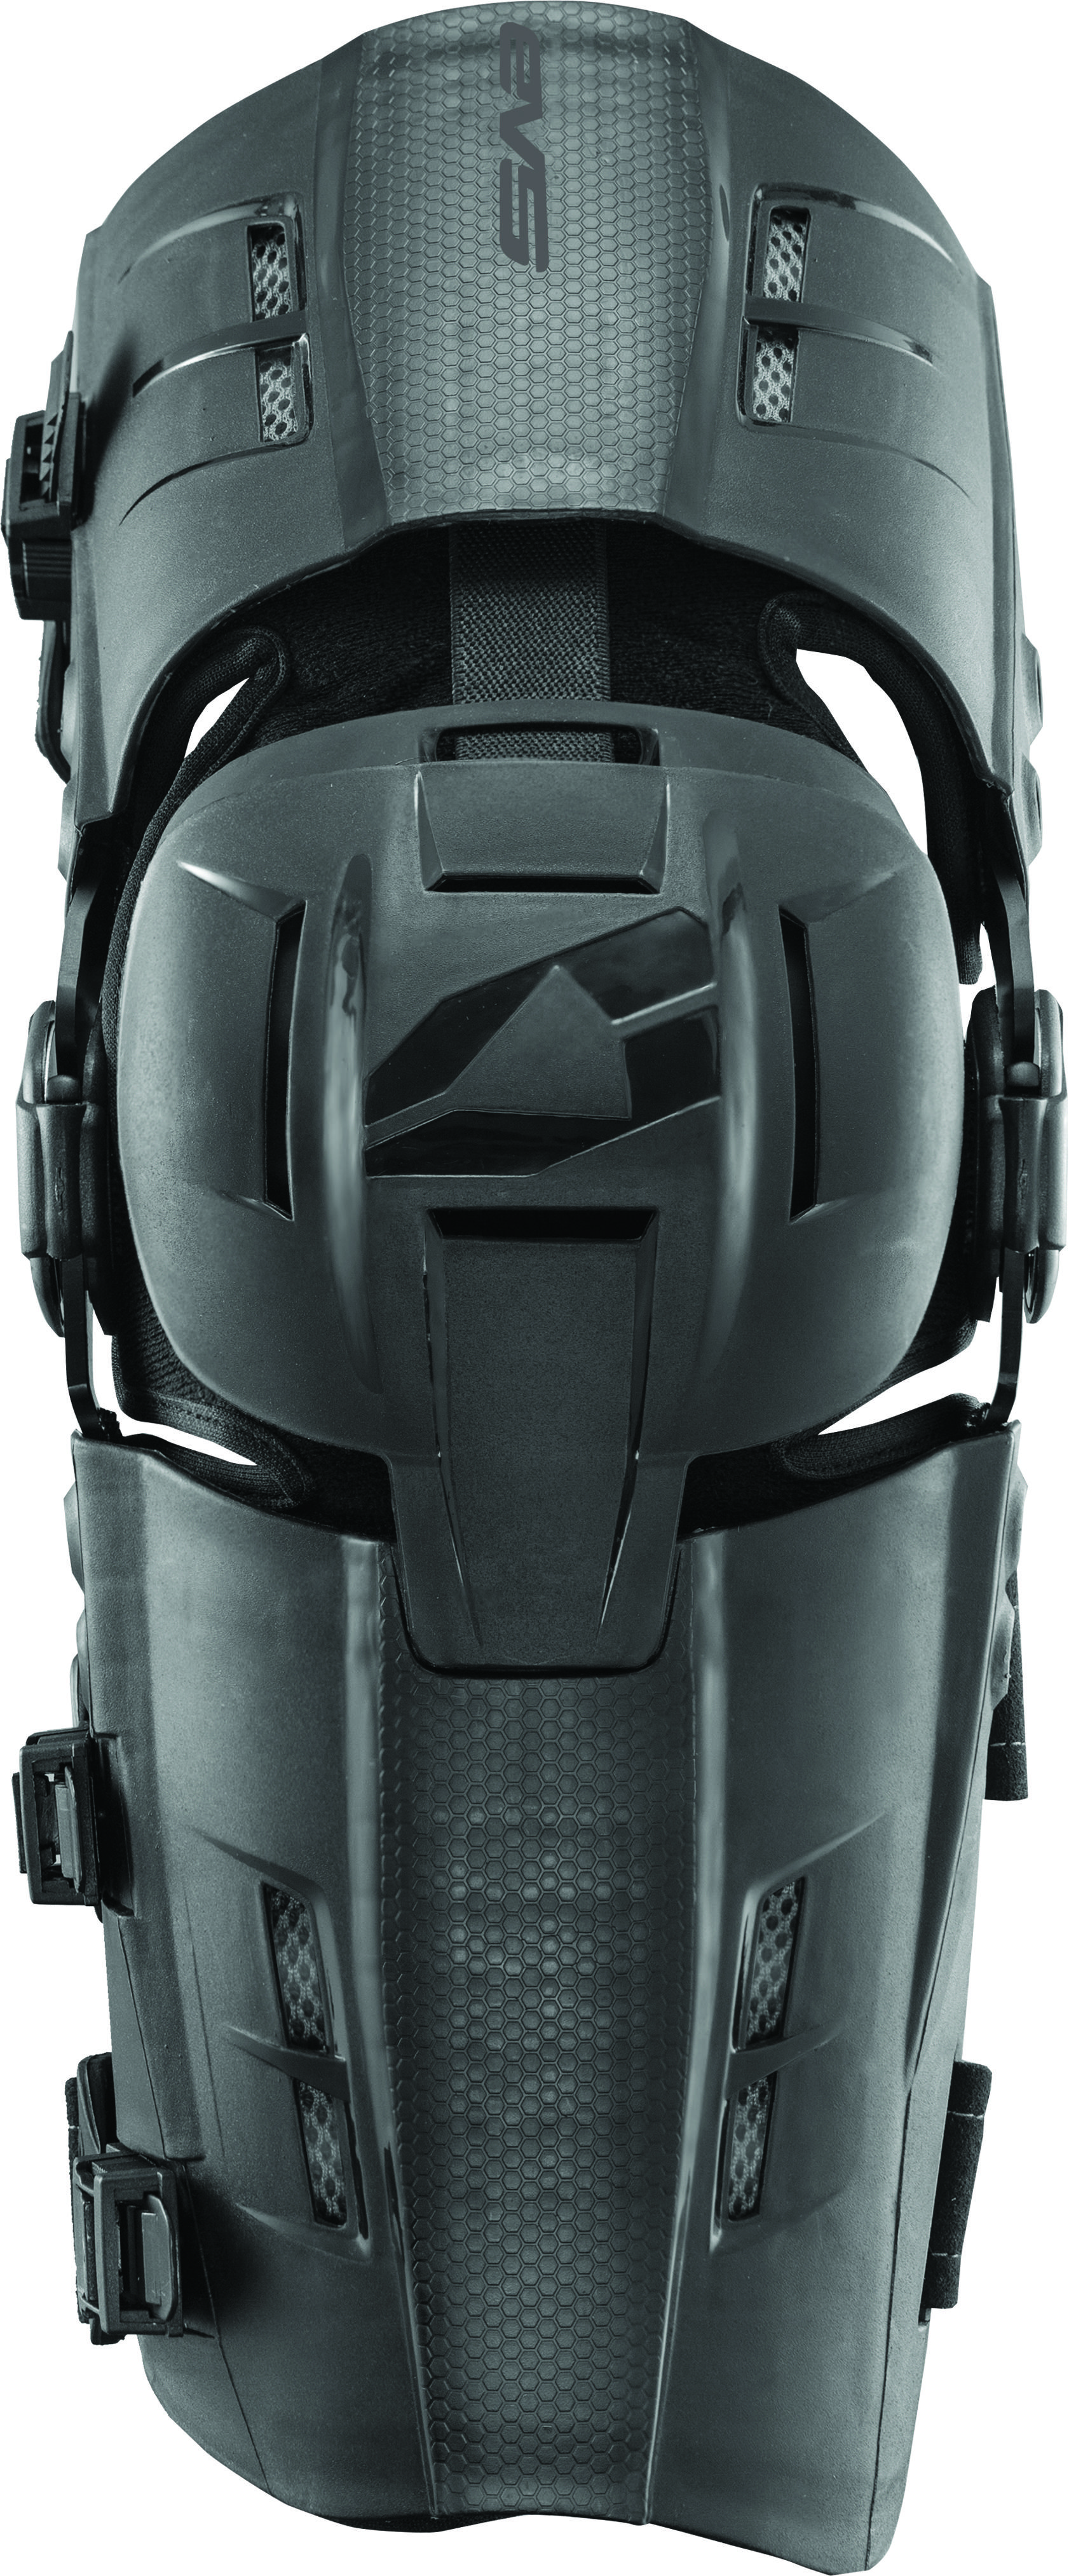 Rs9 Knee Braces - X-Large - Click Image to Close